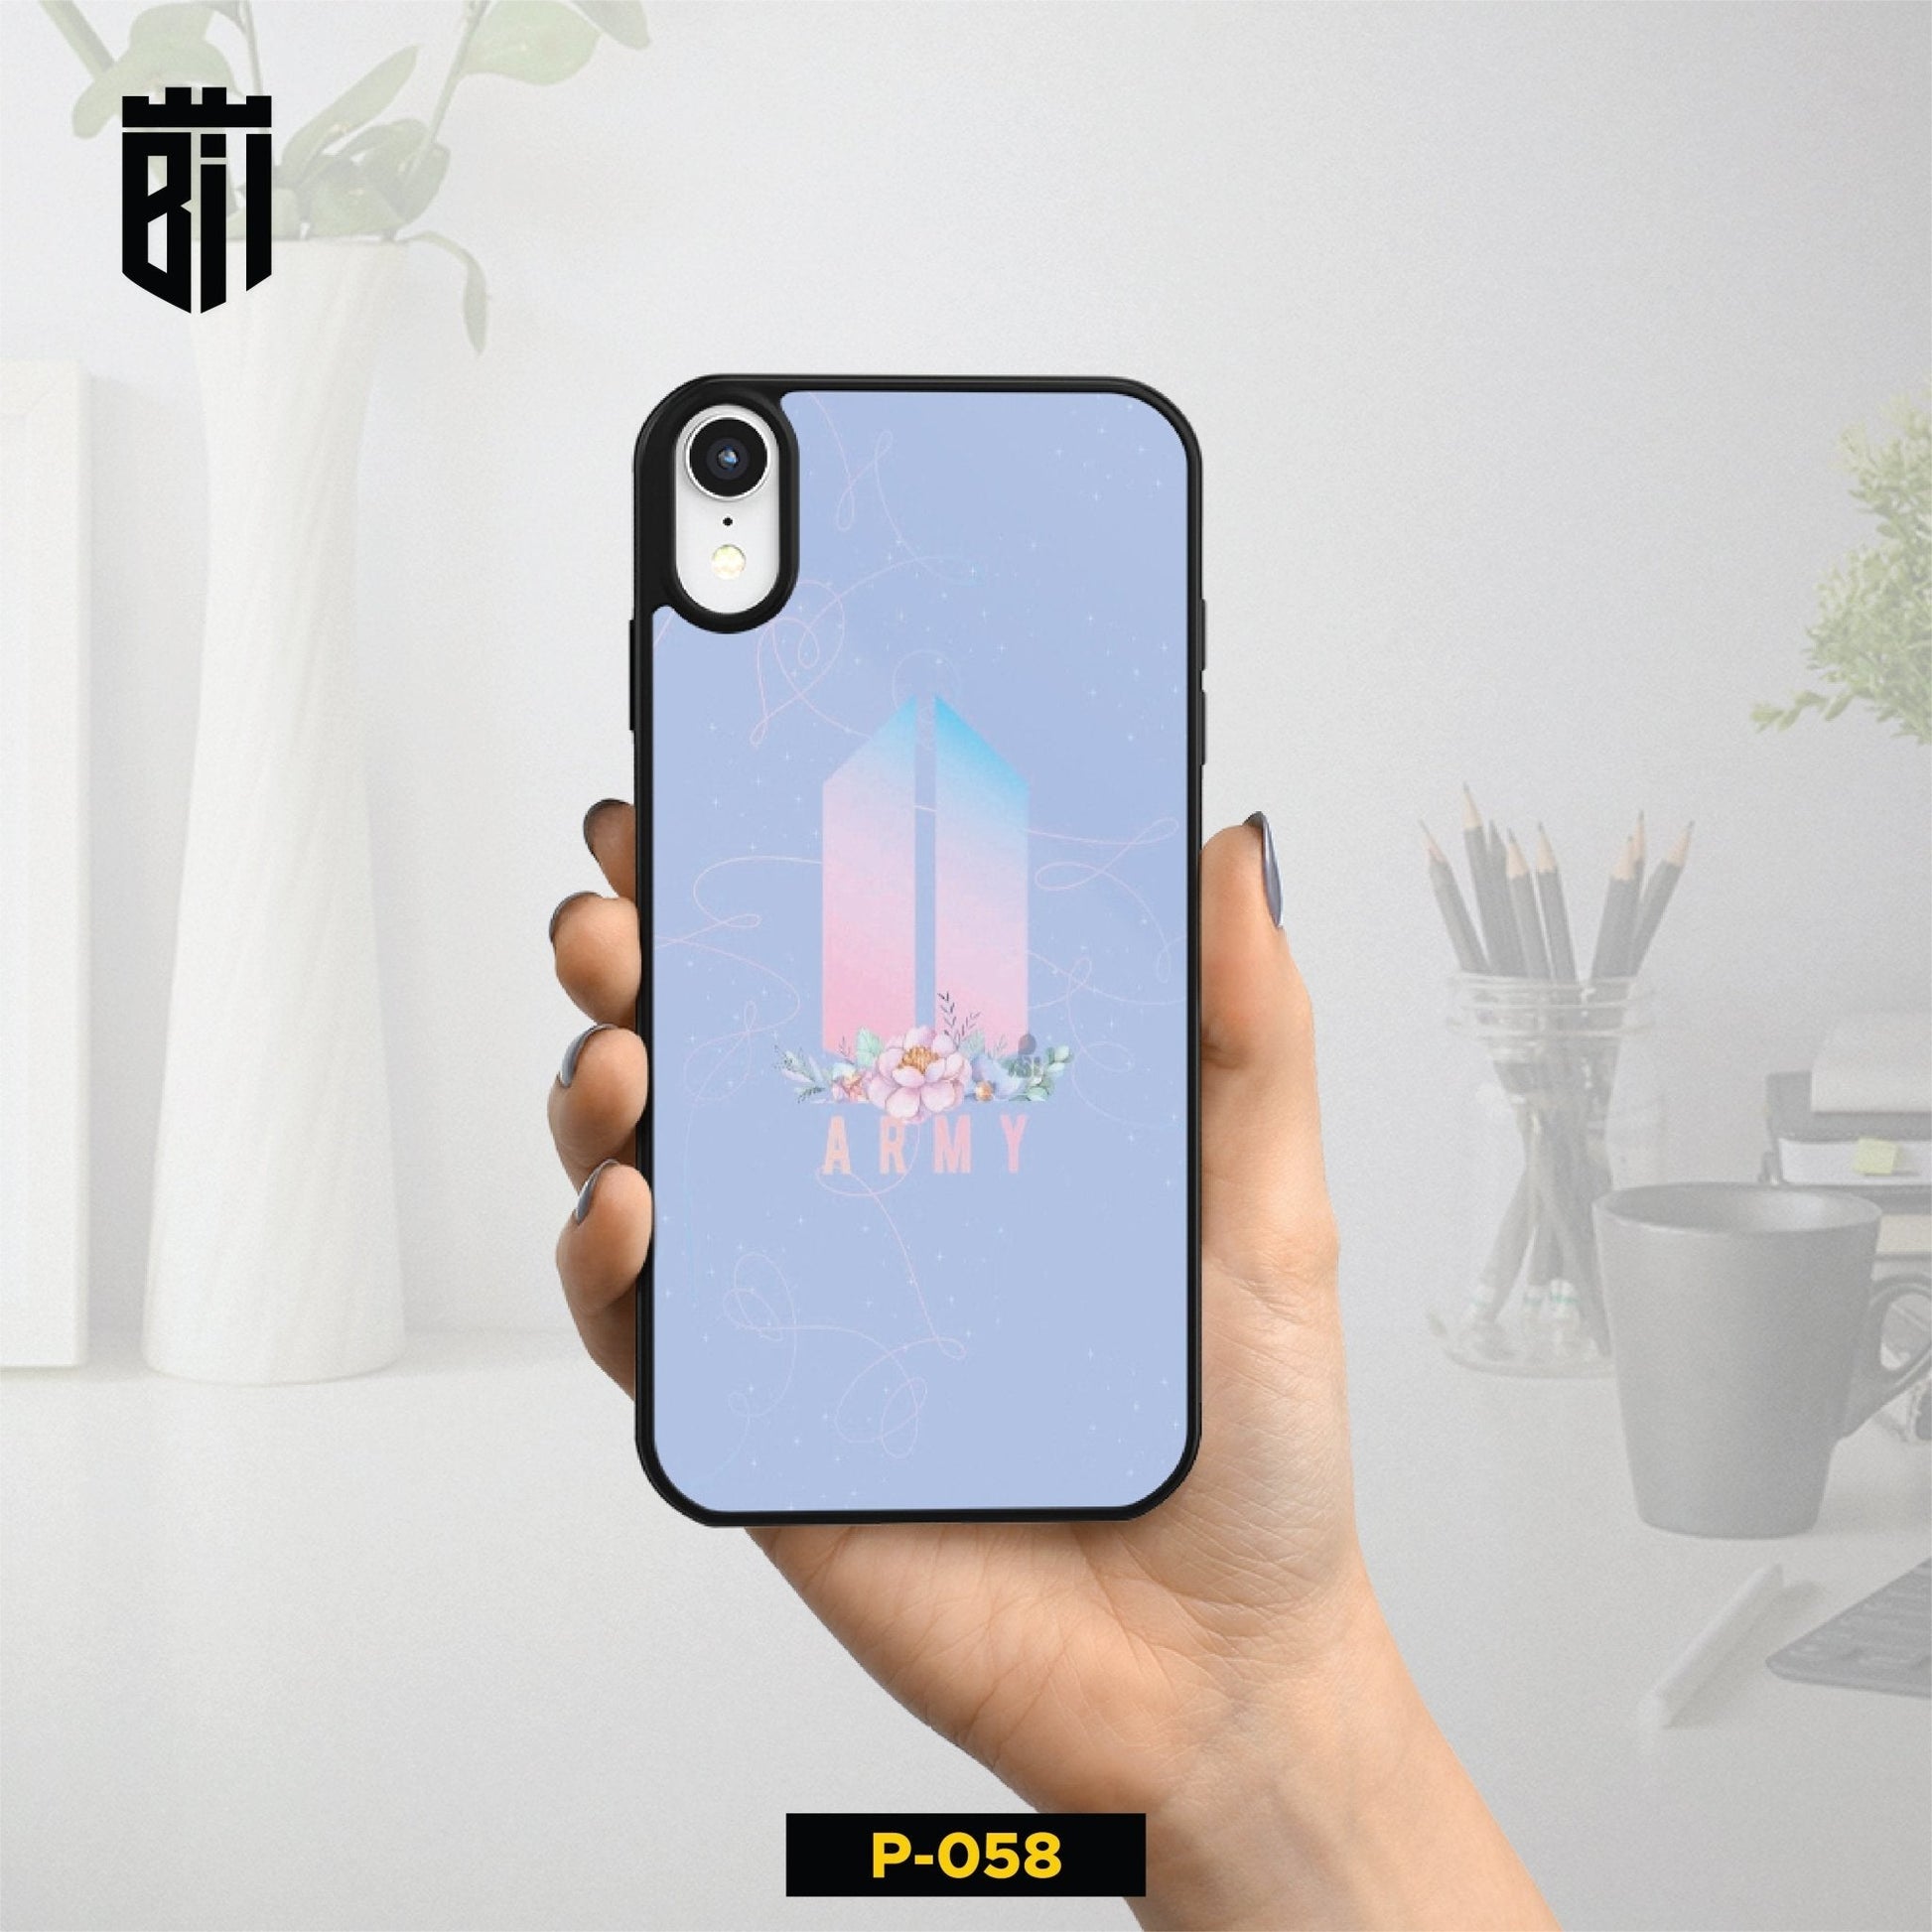 P058 BTS Army Gloss Plate Mobile Case - BREACHIT